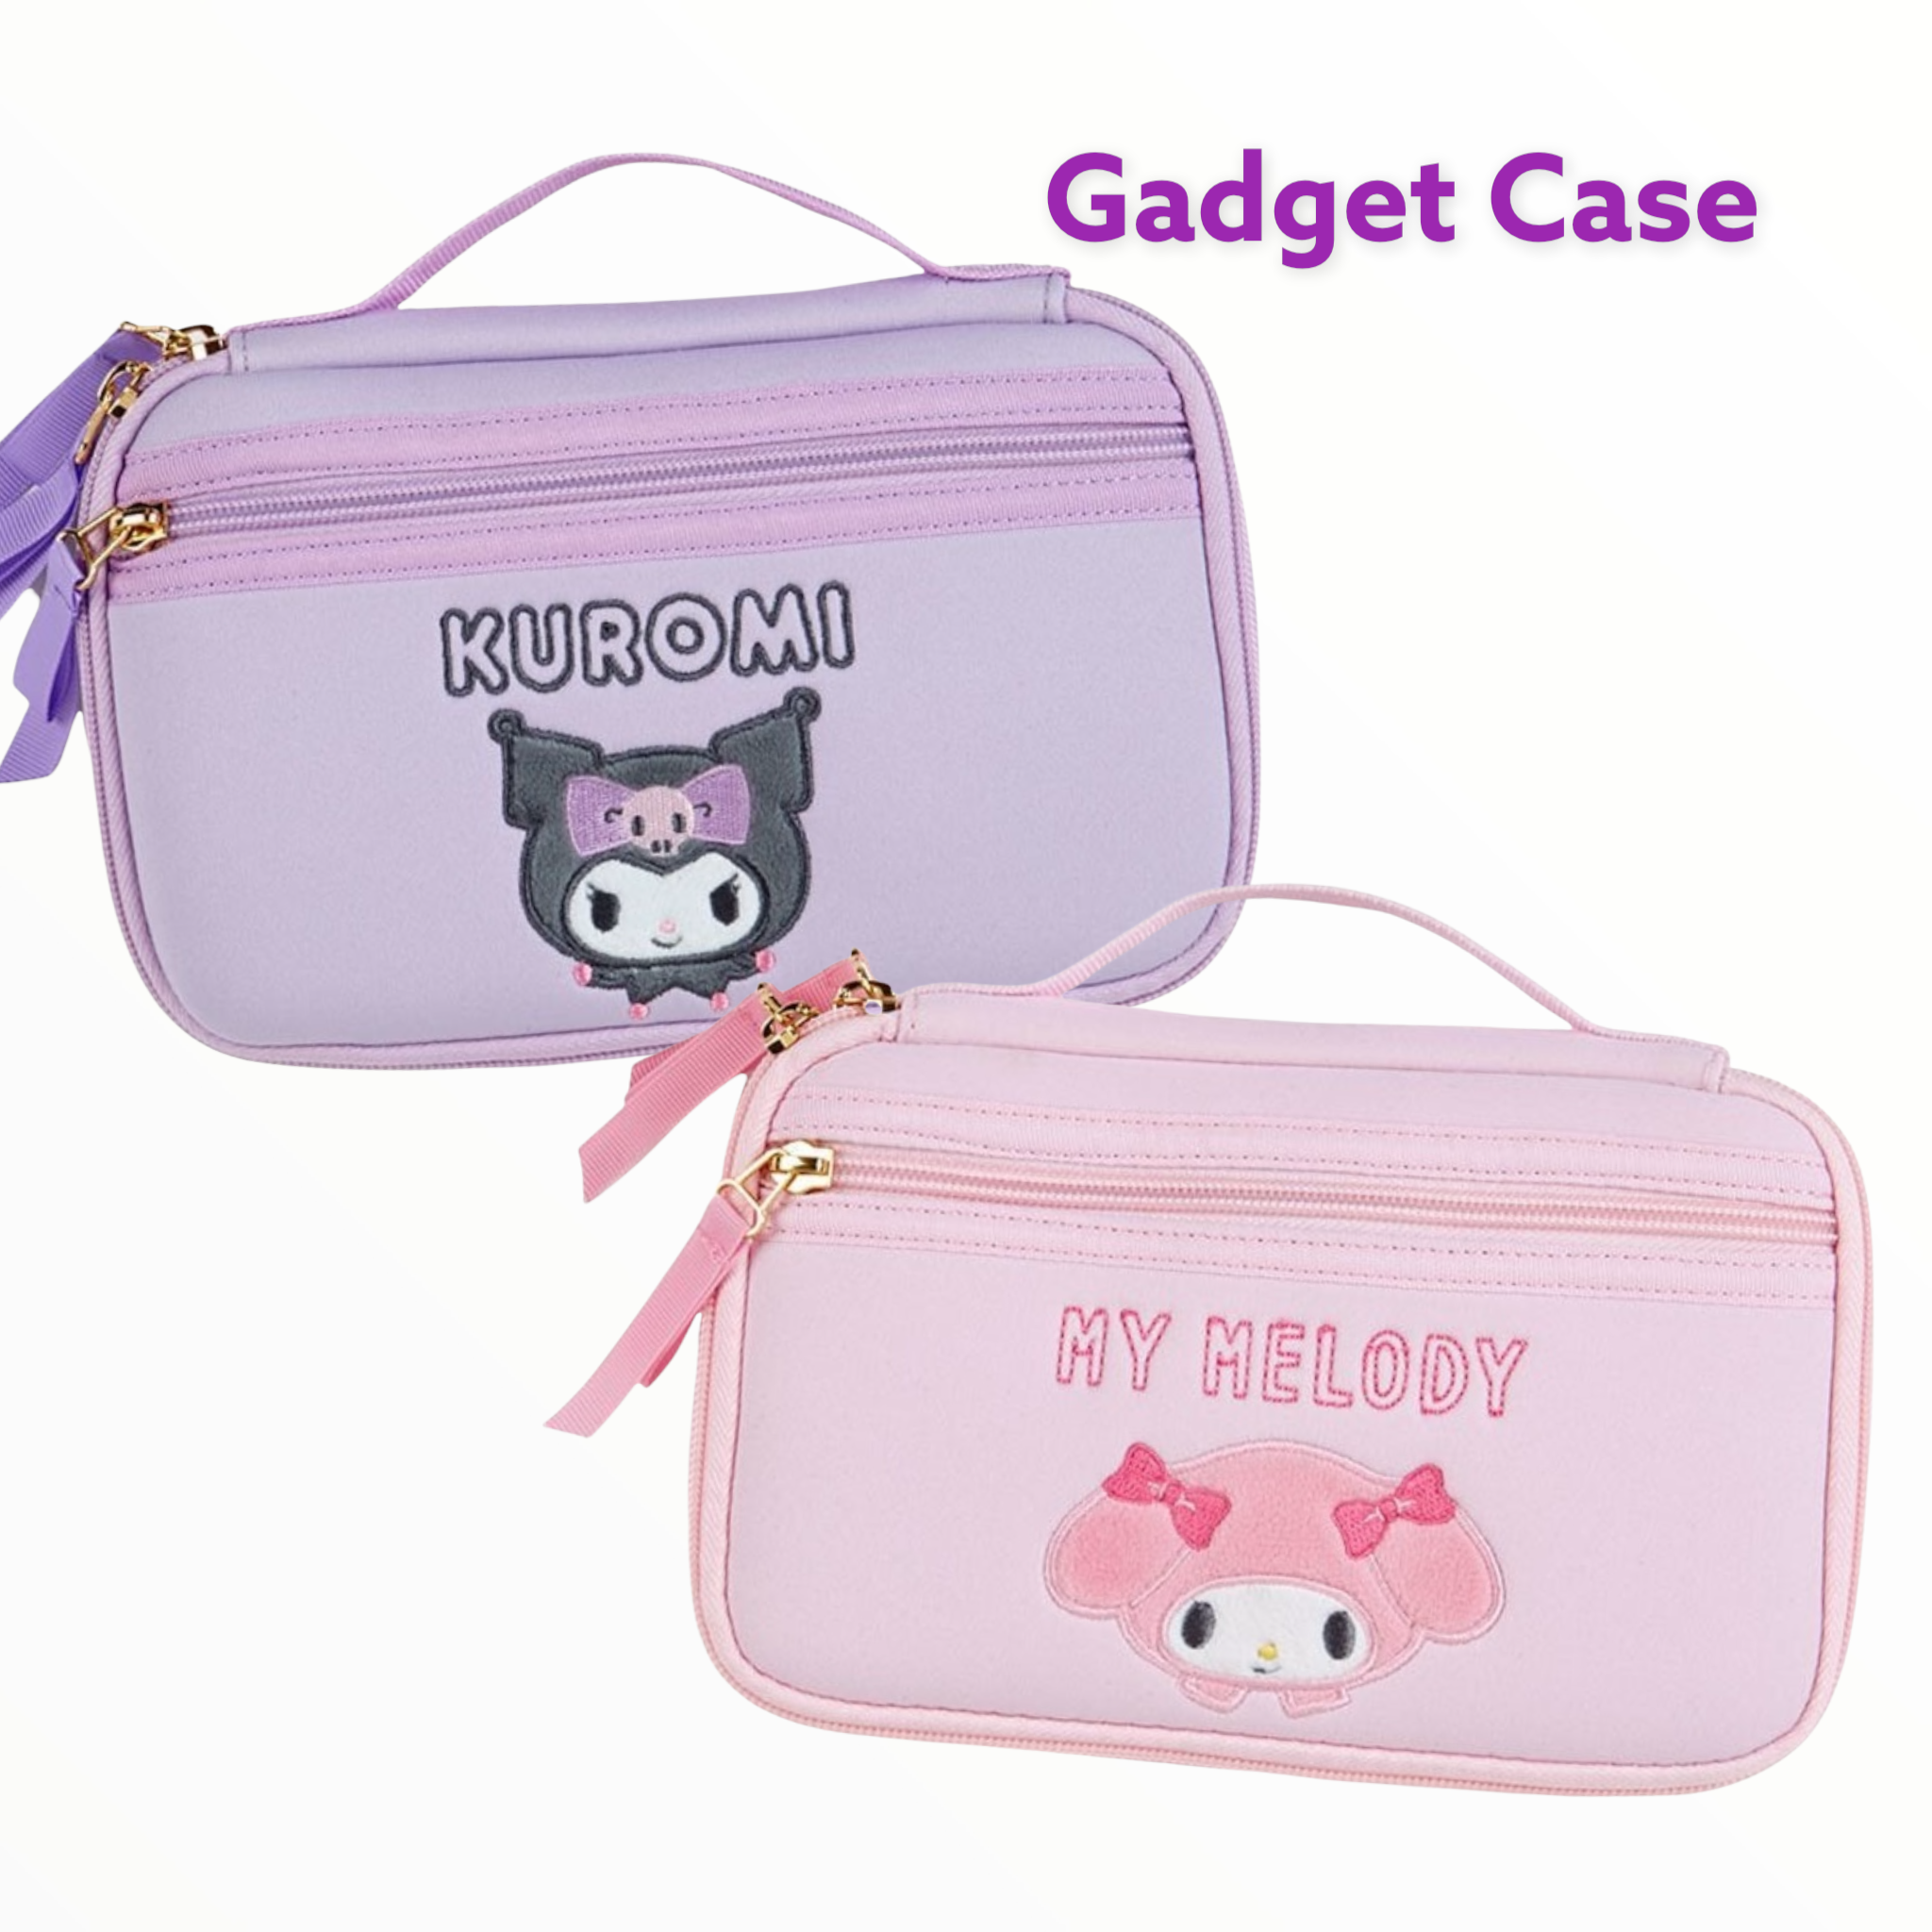 Sanrio Character Kuromi 11 Inch Gadget Soft Pouch Tablet PC Case B5 Size  New